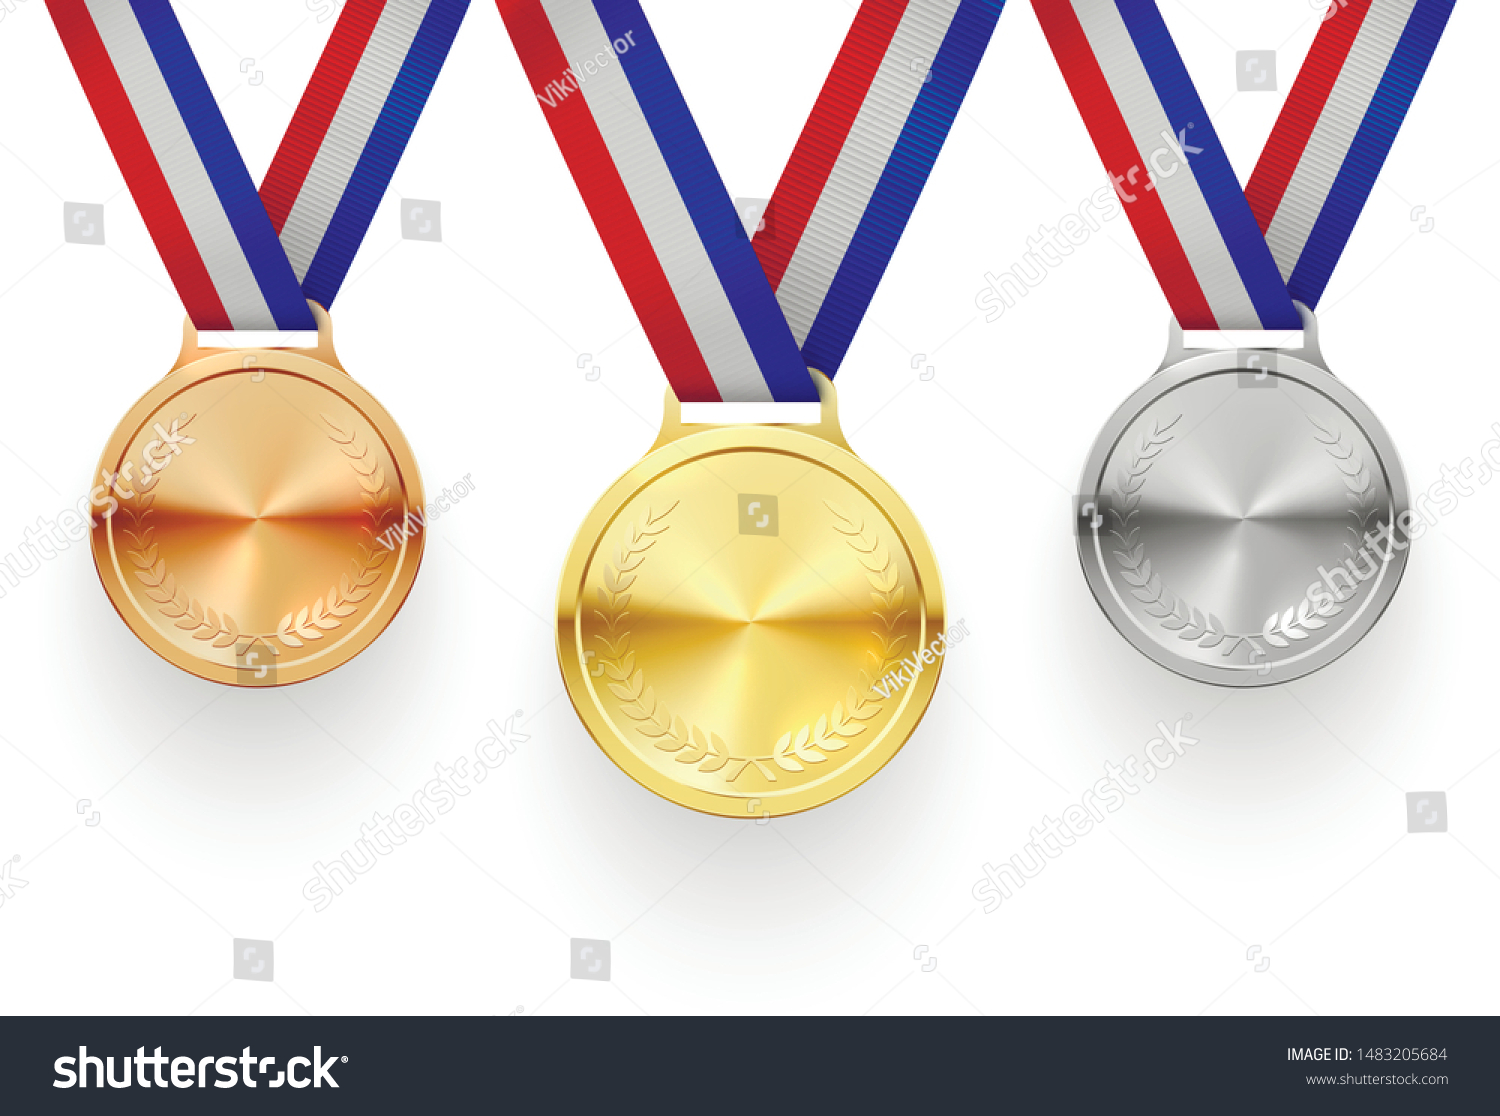 Gold, silver and bronze medals on ribbons realistic illustrations set. Sports competition first, second and third place awards isolated cliparts pack. Championship reward. Contest achievement, victory #1483205684